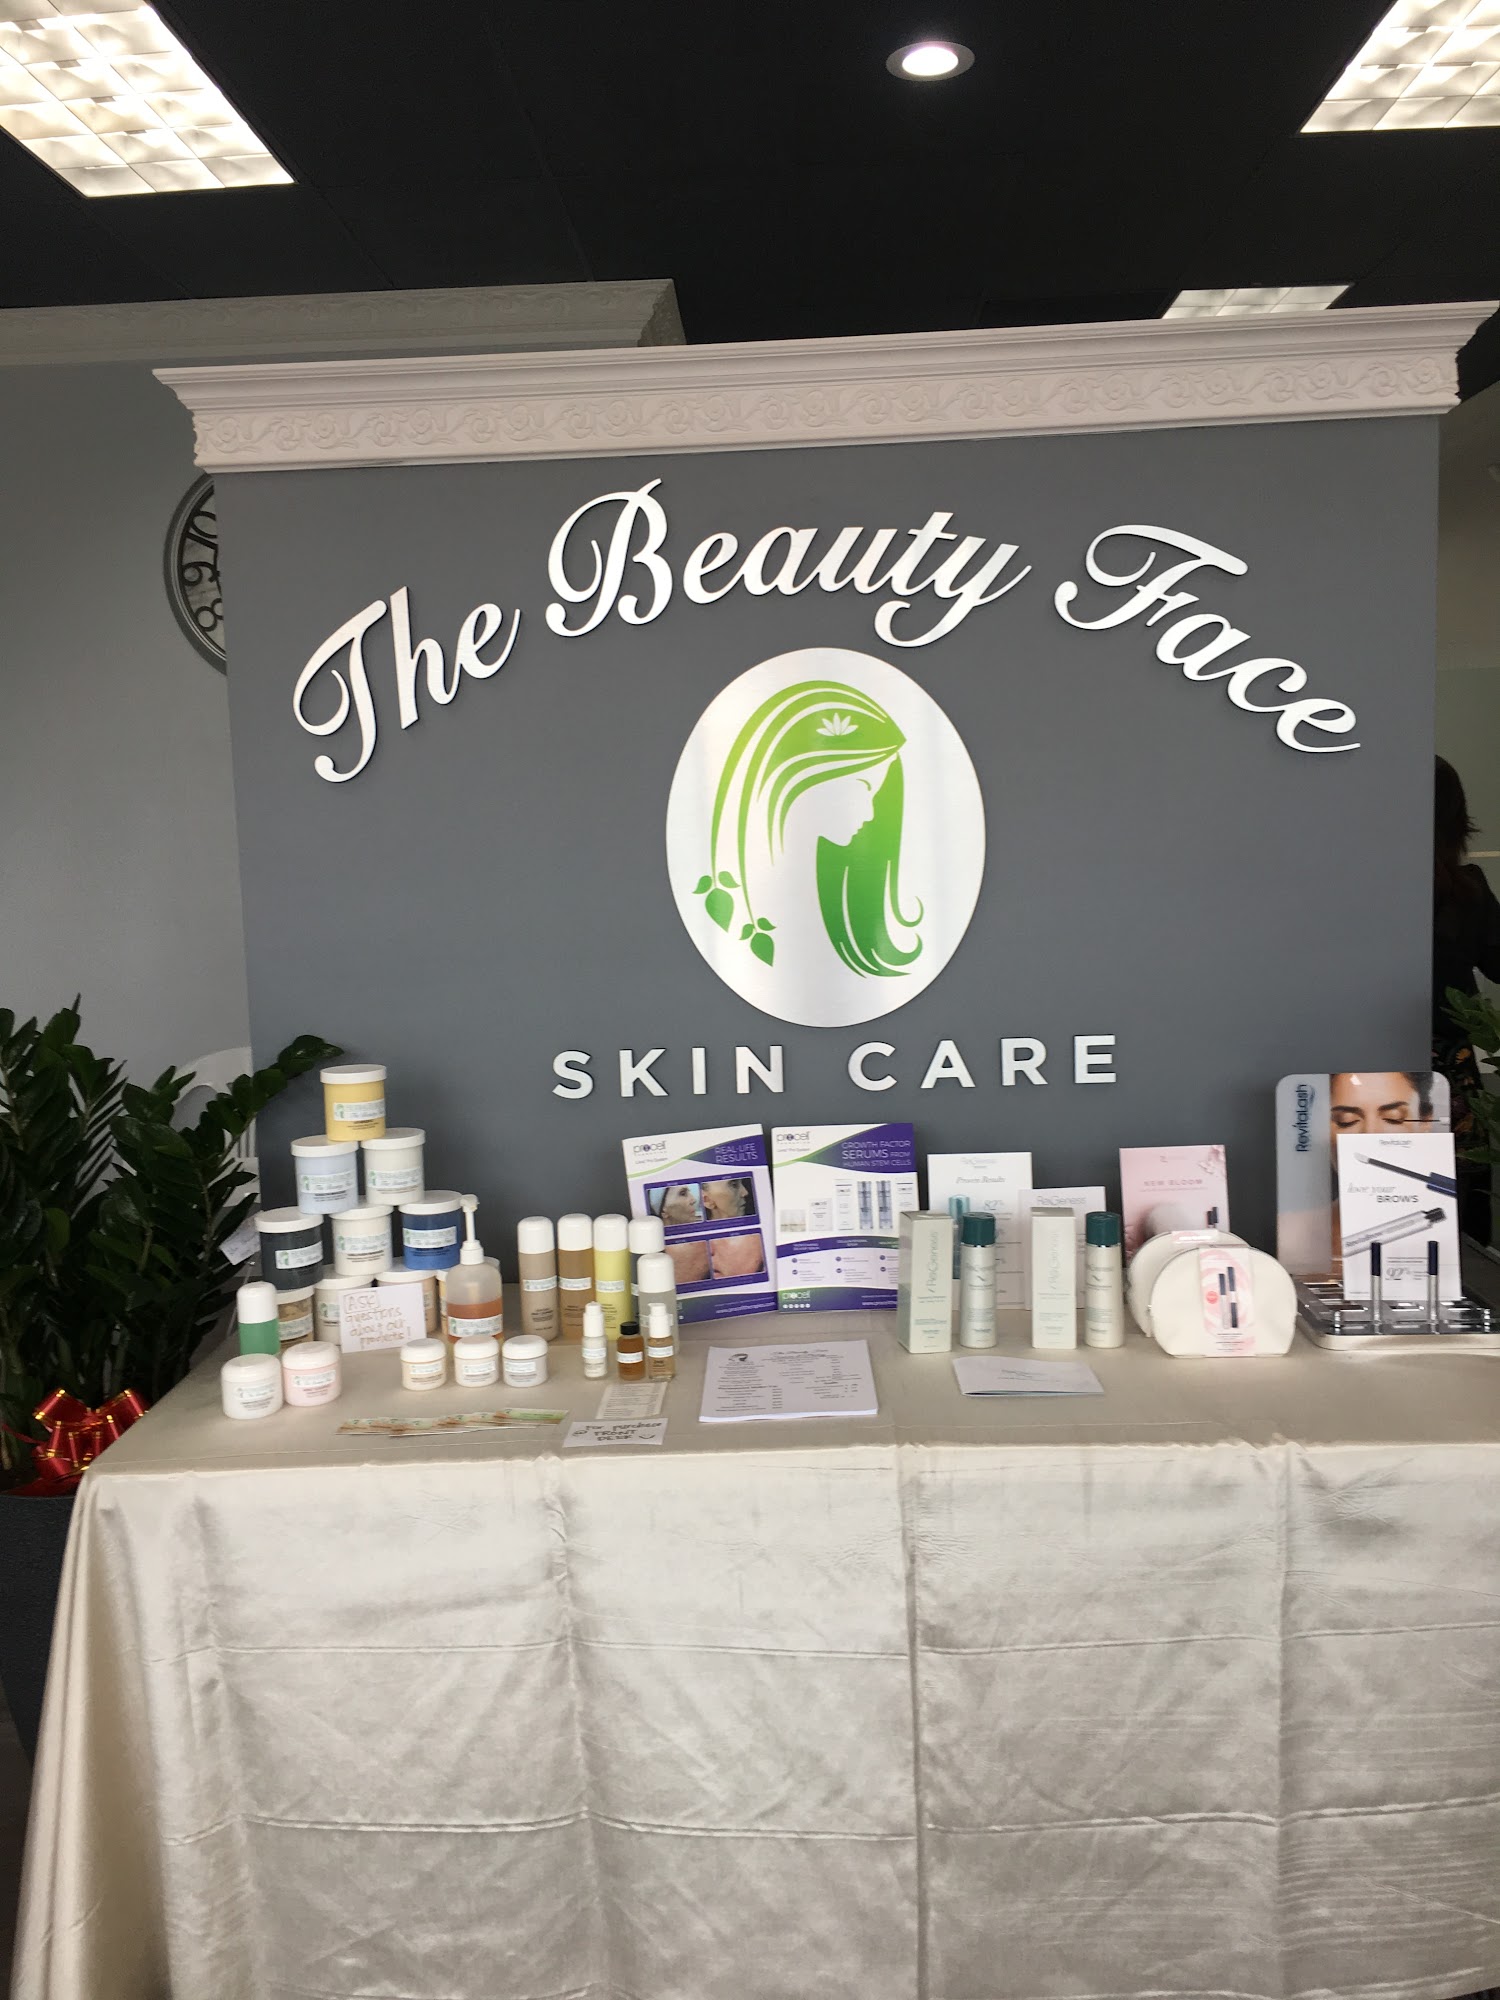 The Beauty Face Skin Care